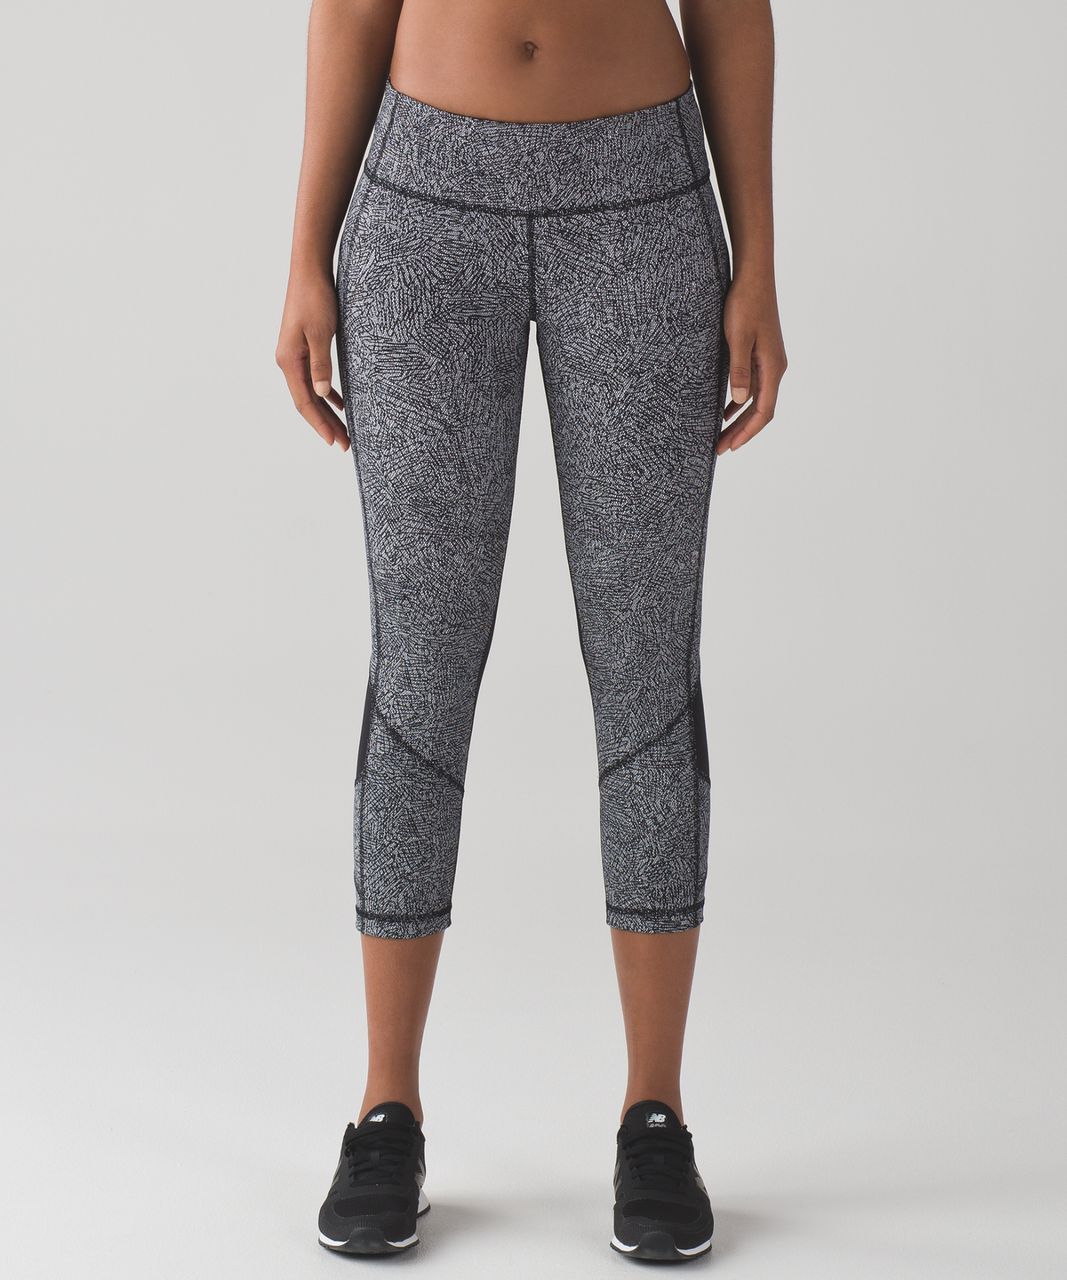 Lululemon Pace Rival Crop. Dottie Tribe White Black. Collector's